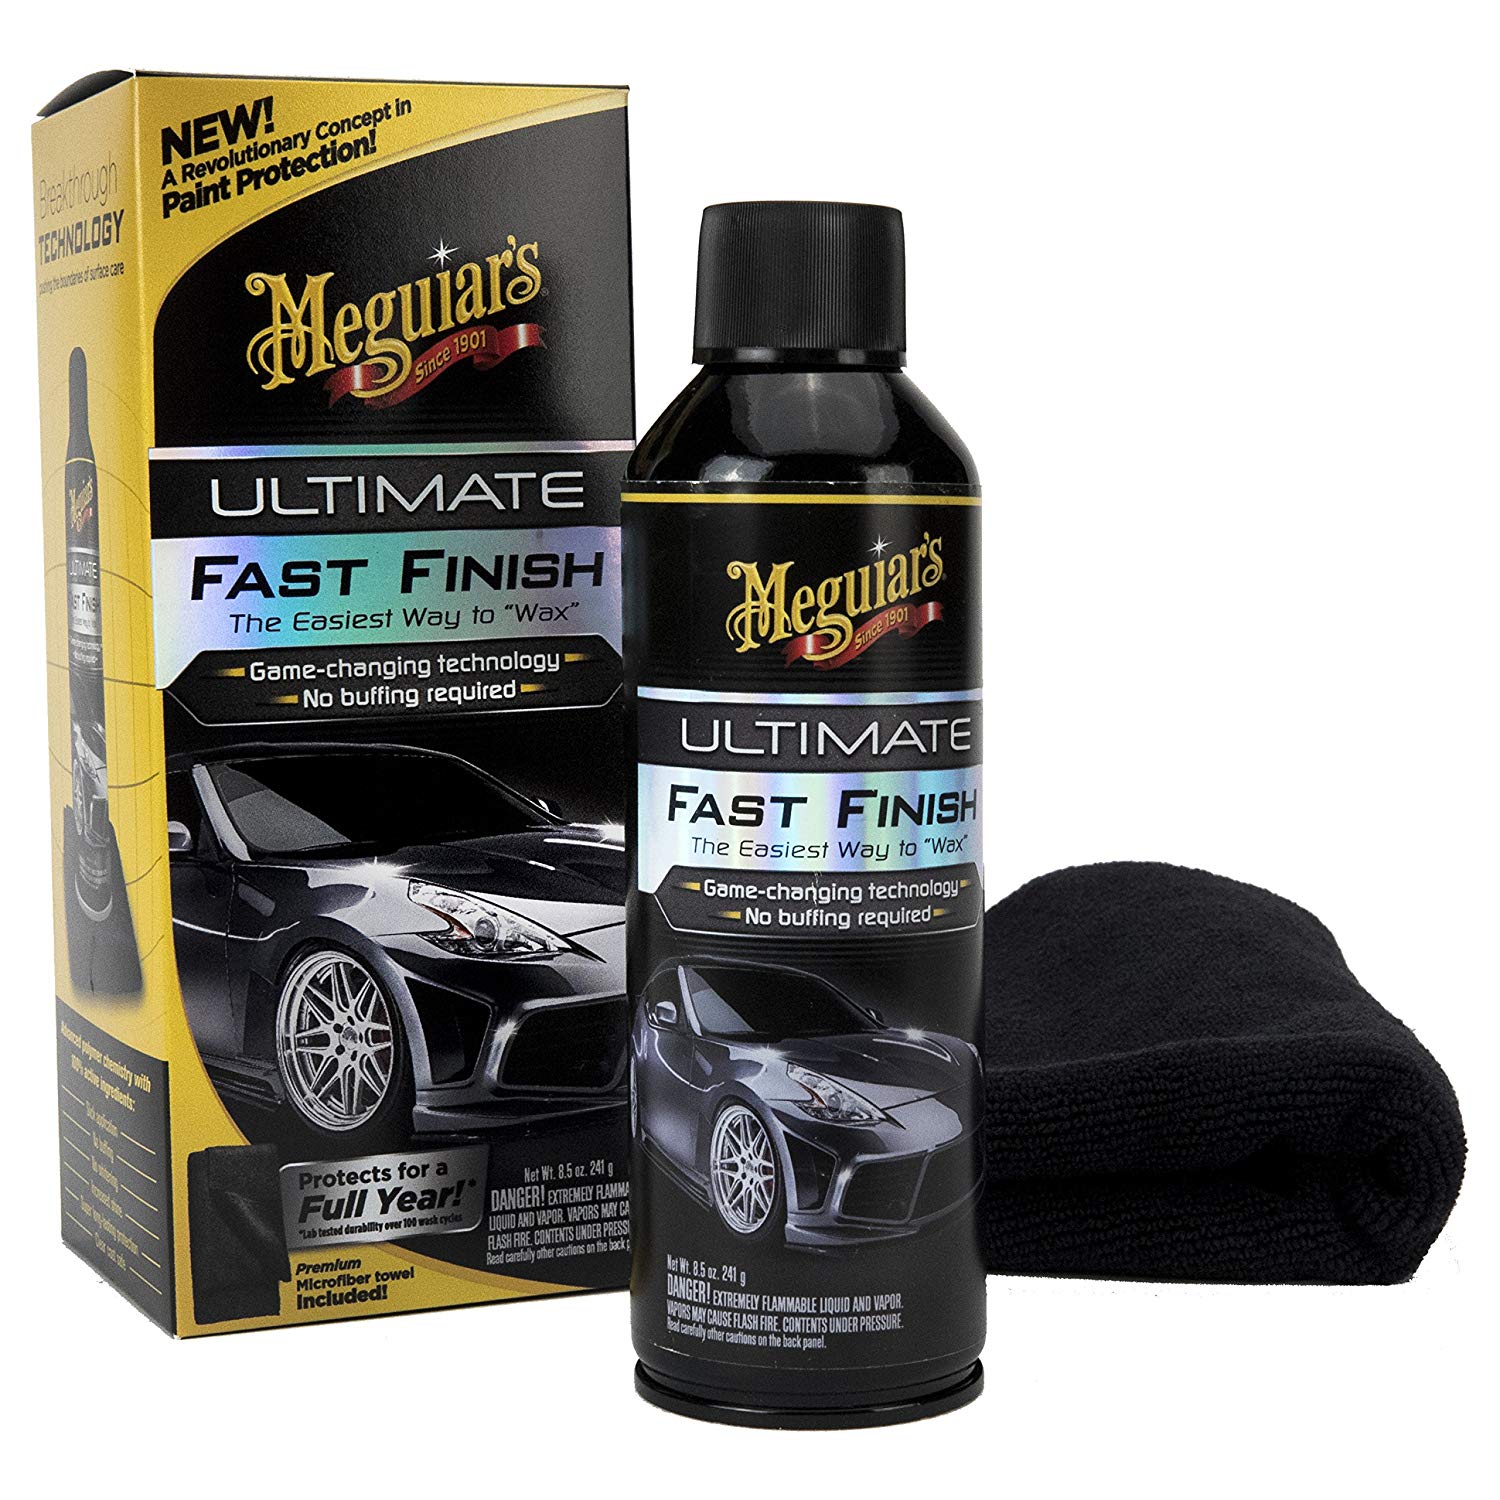 Meguiar’s Ultimate Fast Finish – The Easiest Way to “Wax” Only $8.65!